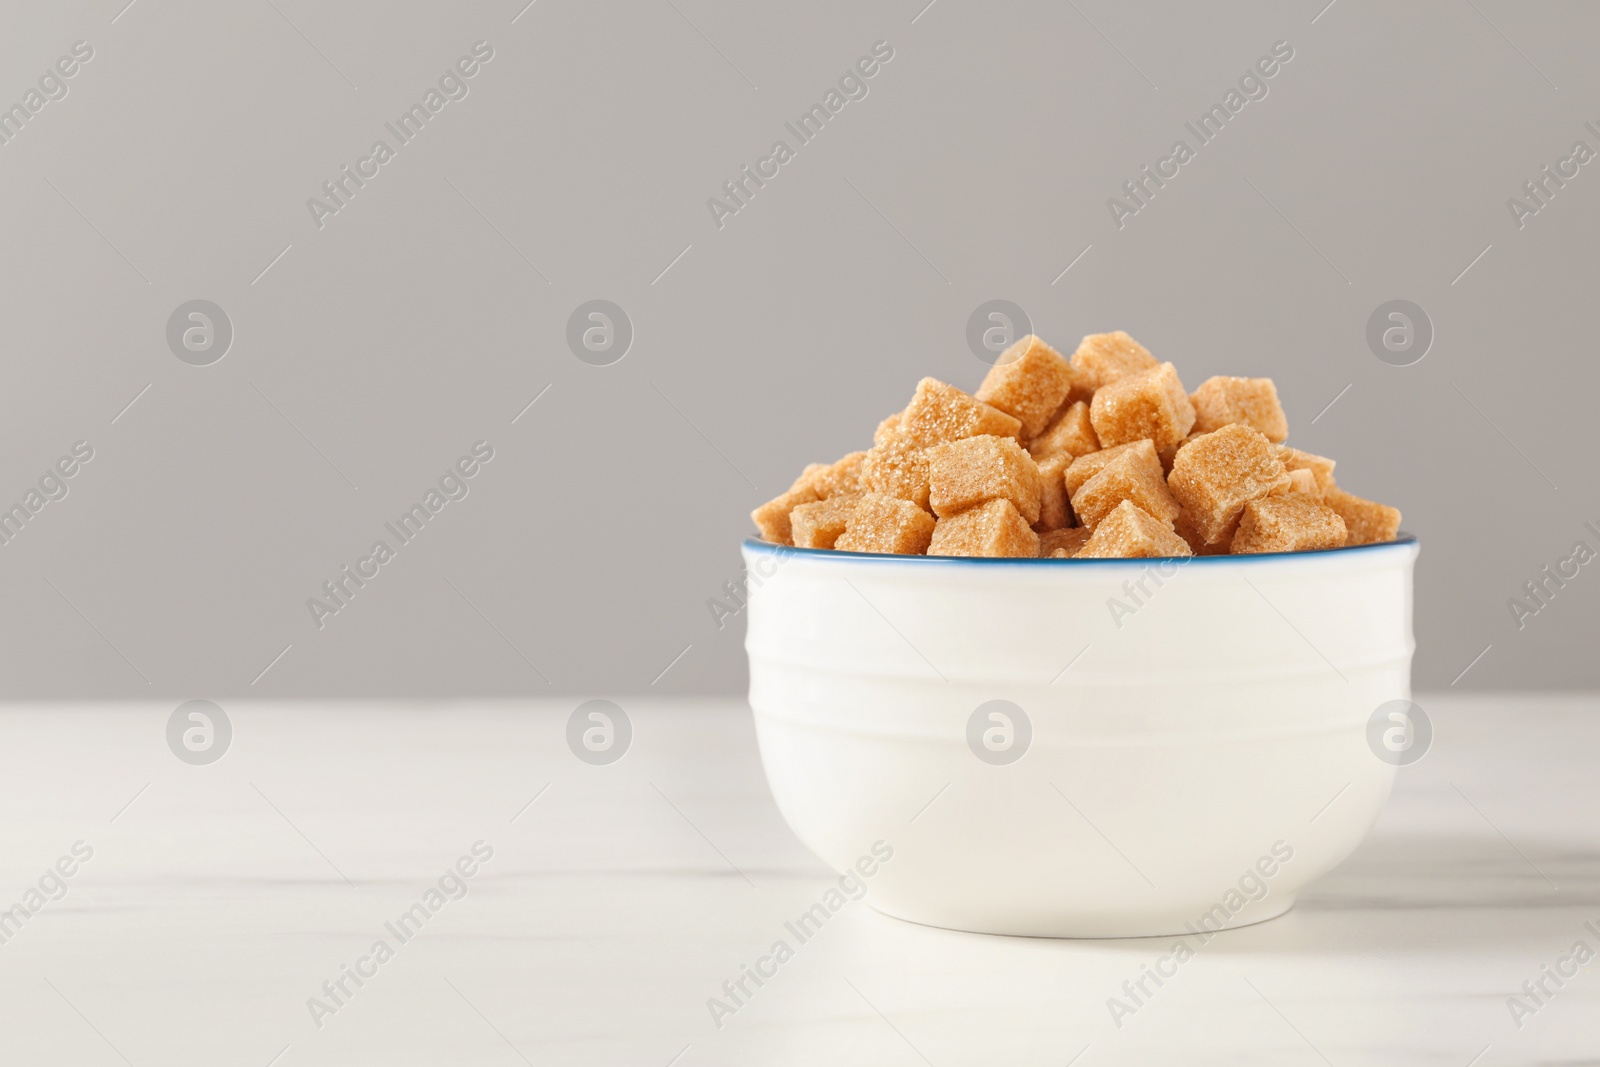 Photo of Brown sugar cubes in bowl on white table, space for text